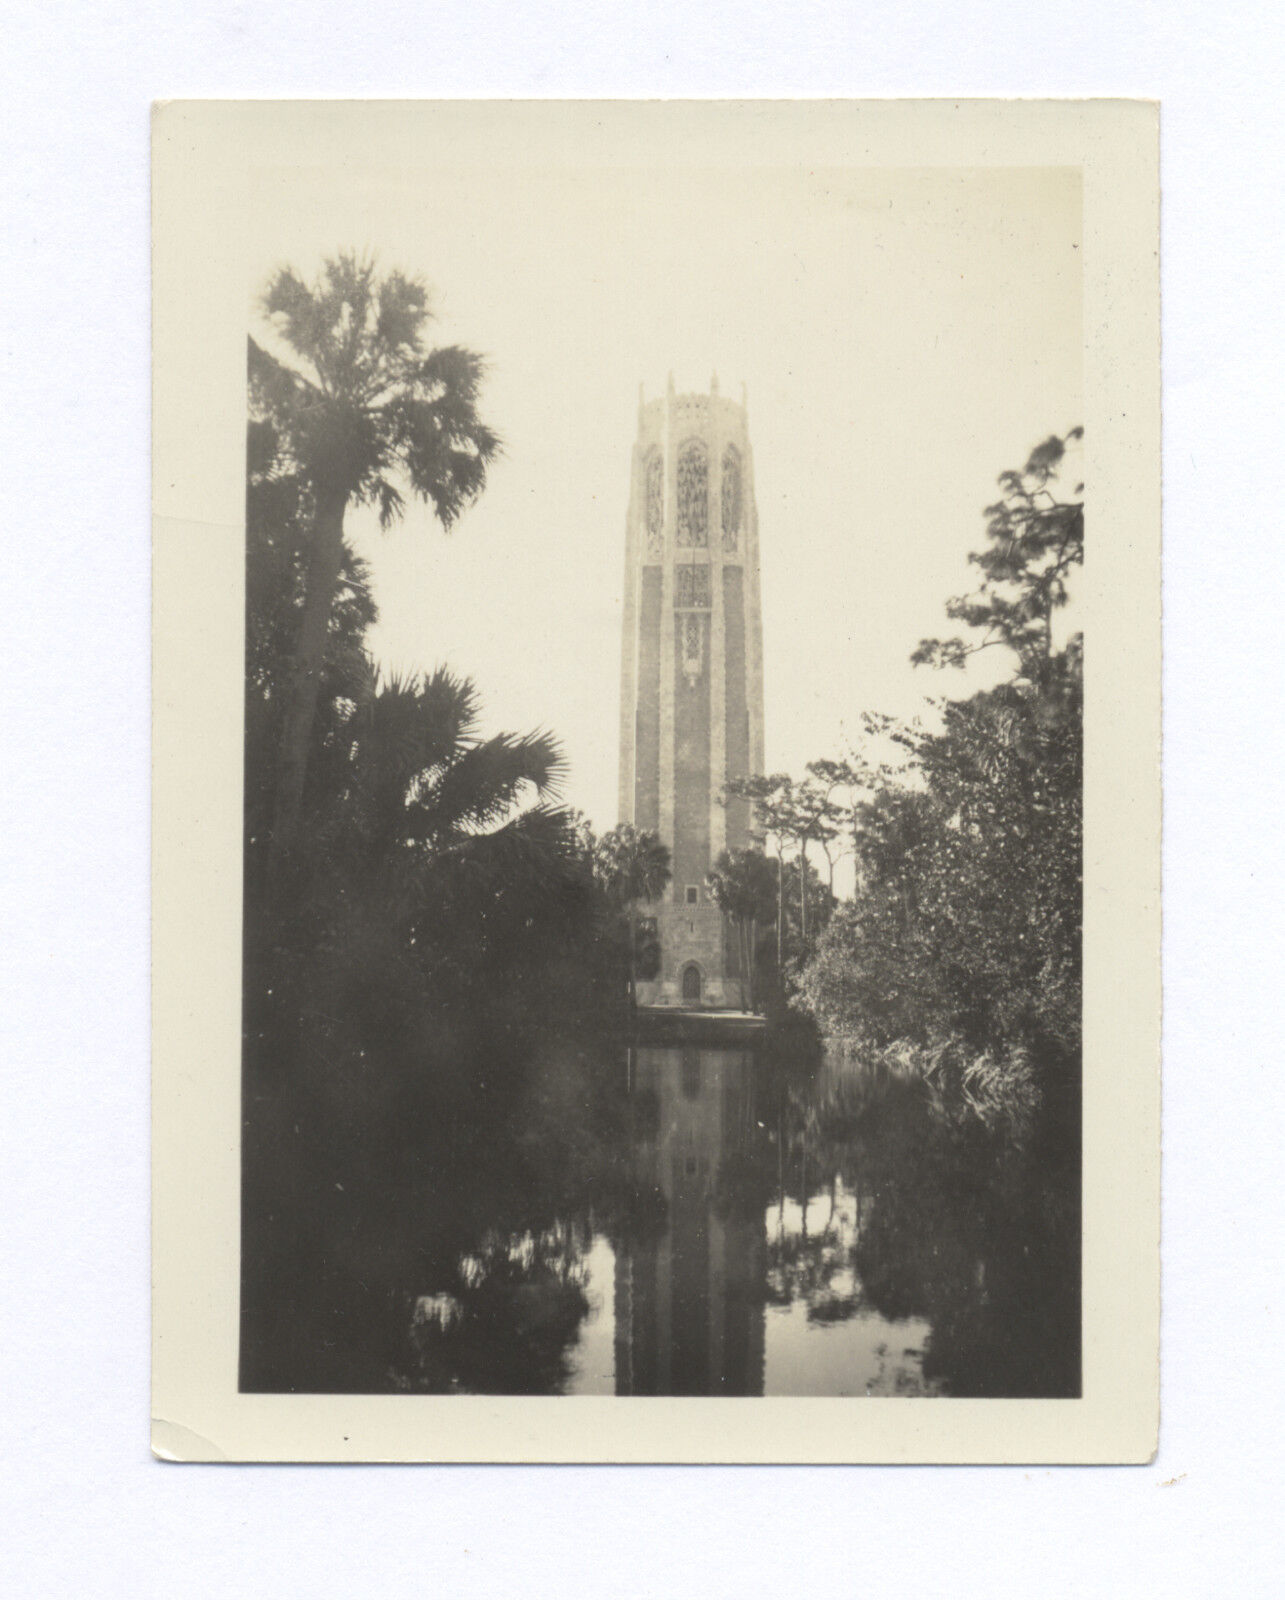 1930\'s LAKE WALES, FL Snapshot: BOK TOWER Doubled by REFLECTION SHADOW in Water